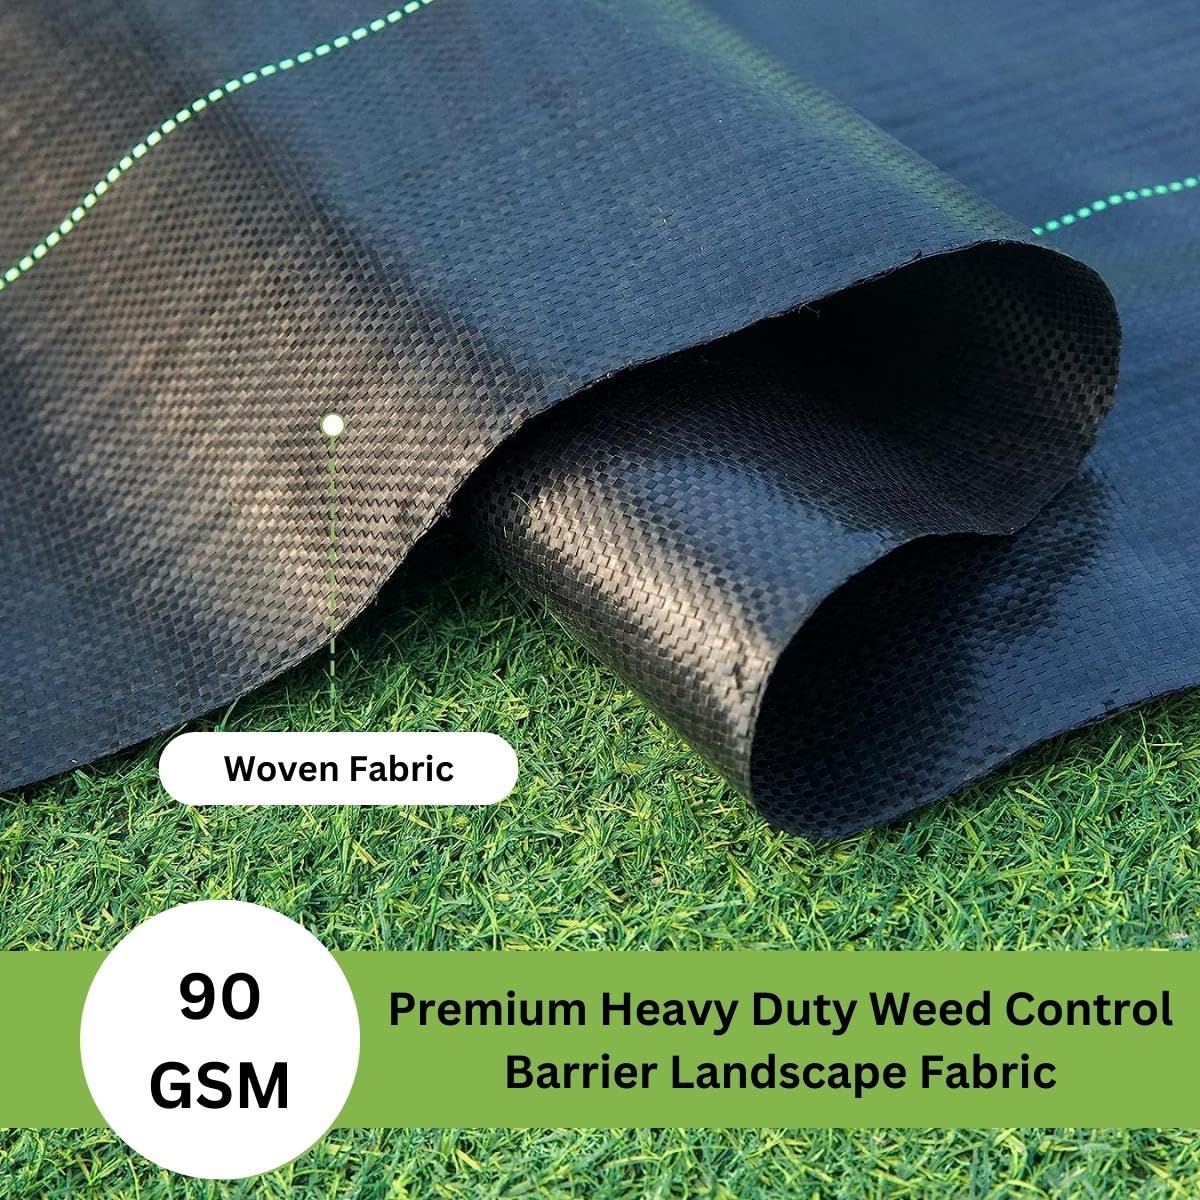 Singhal Premium Garden Weed Control Barrier Sheet Mat 2 x 10 Mtr, Landscape Fabric 90 GSM Heavy Duty Weed Block Gardening Mat for Gardens, Agriculture, Outdoor Projects, Black (2x10 Meter)